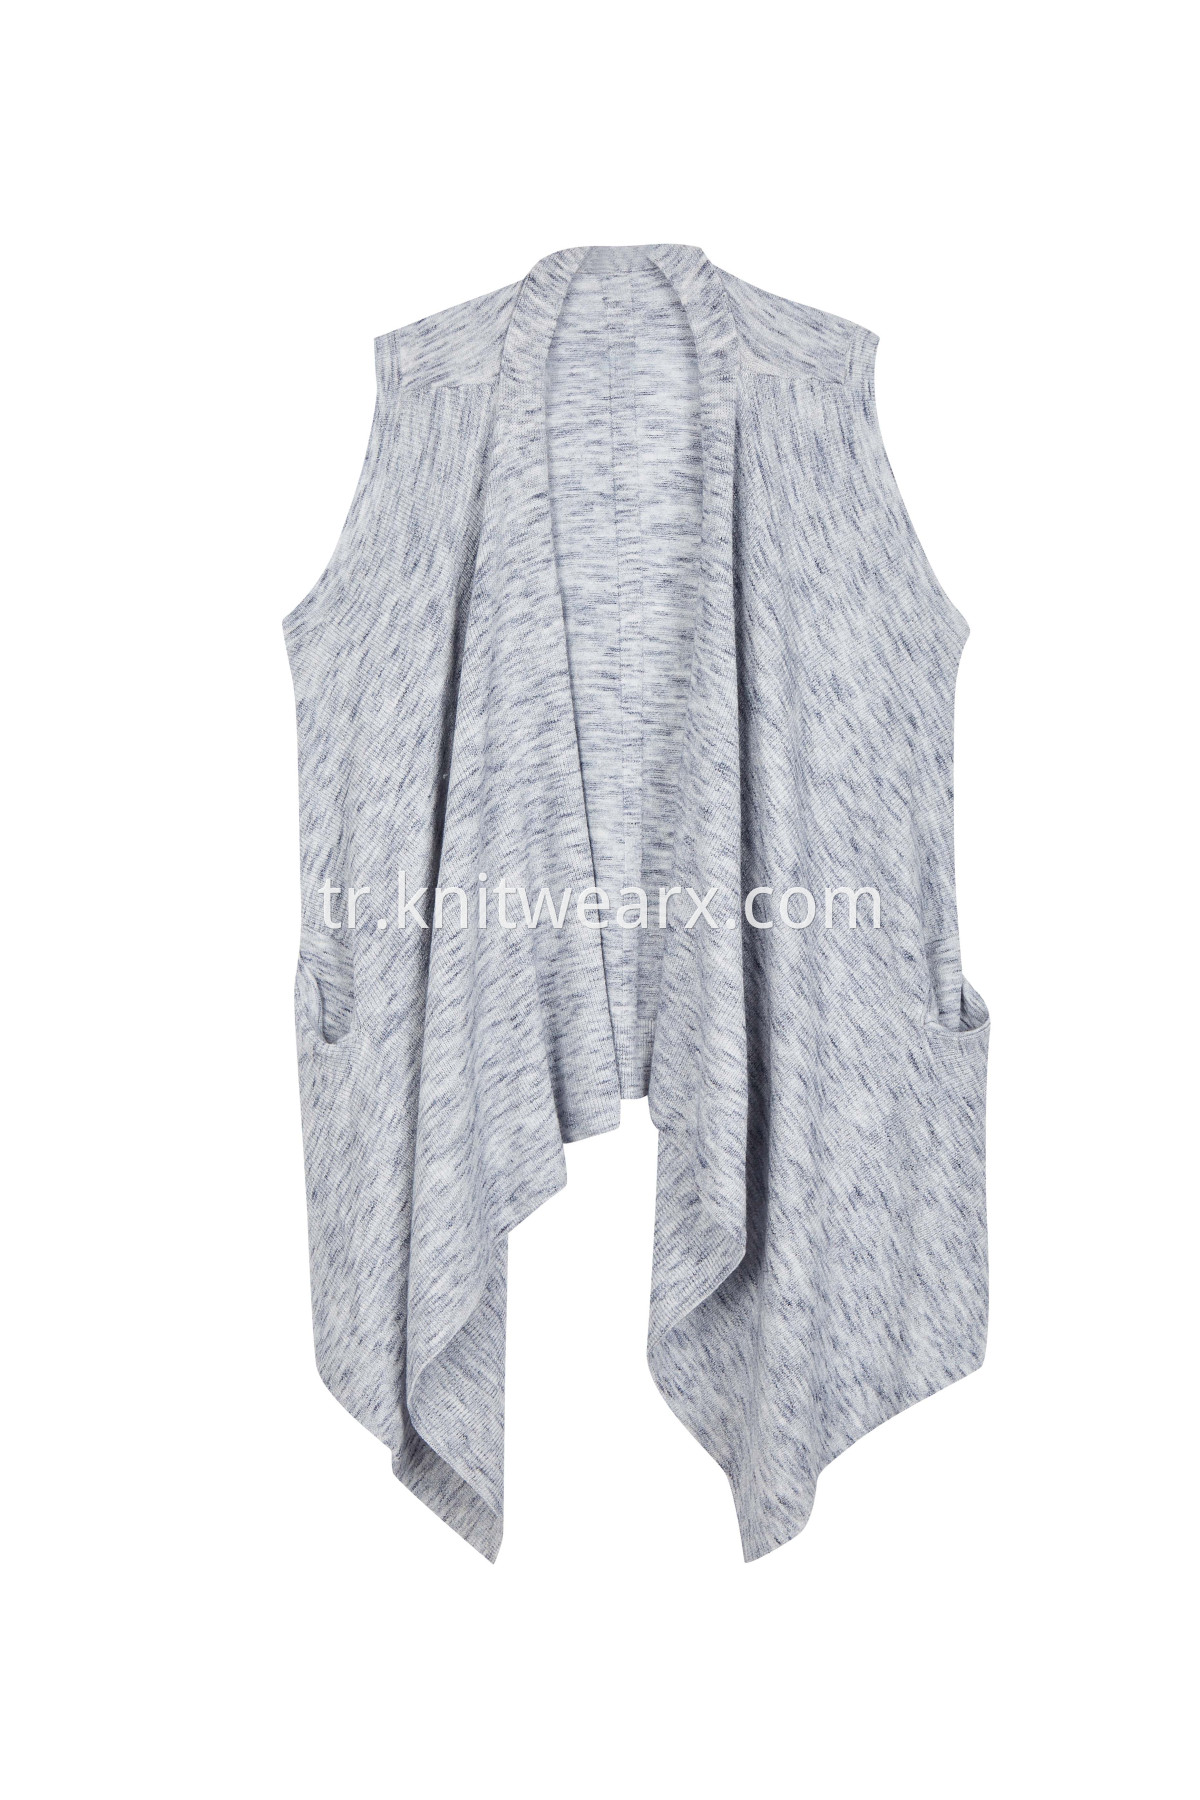 Women's Sleeveless Shawl Collar Wrap Knitted Cardigan with Pockets